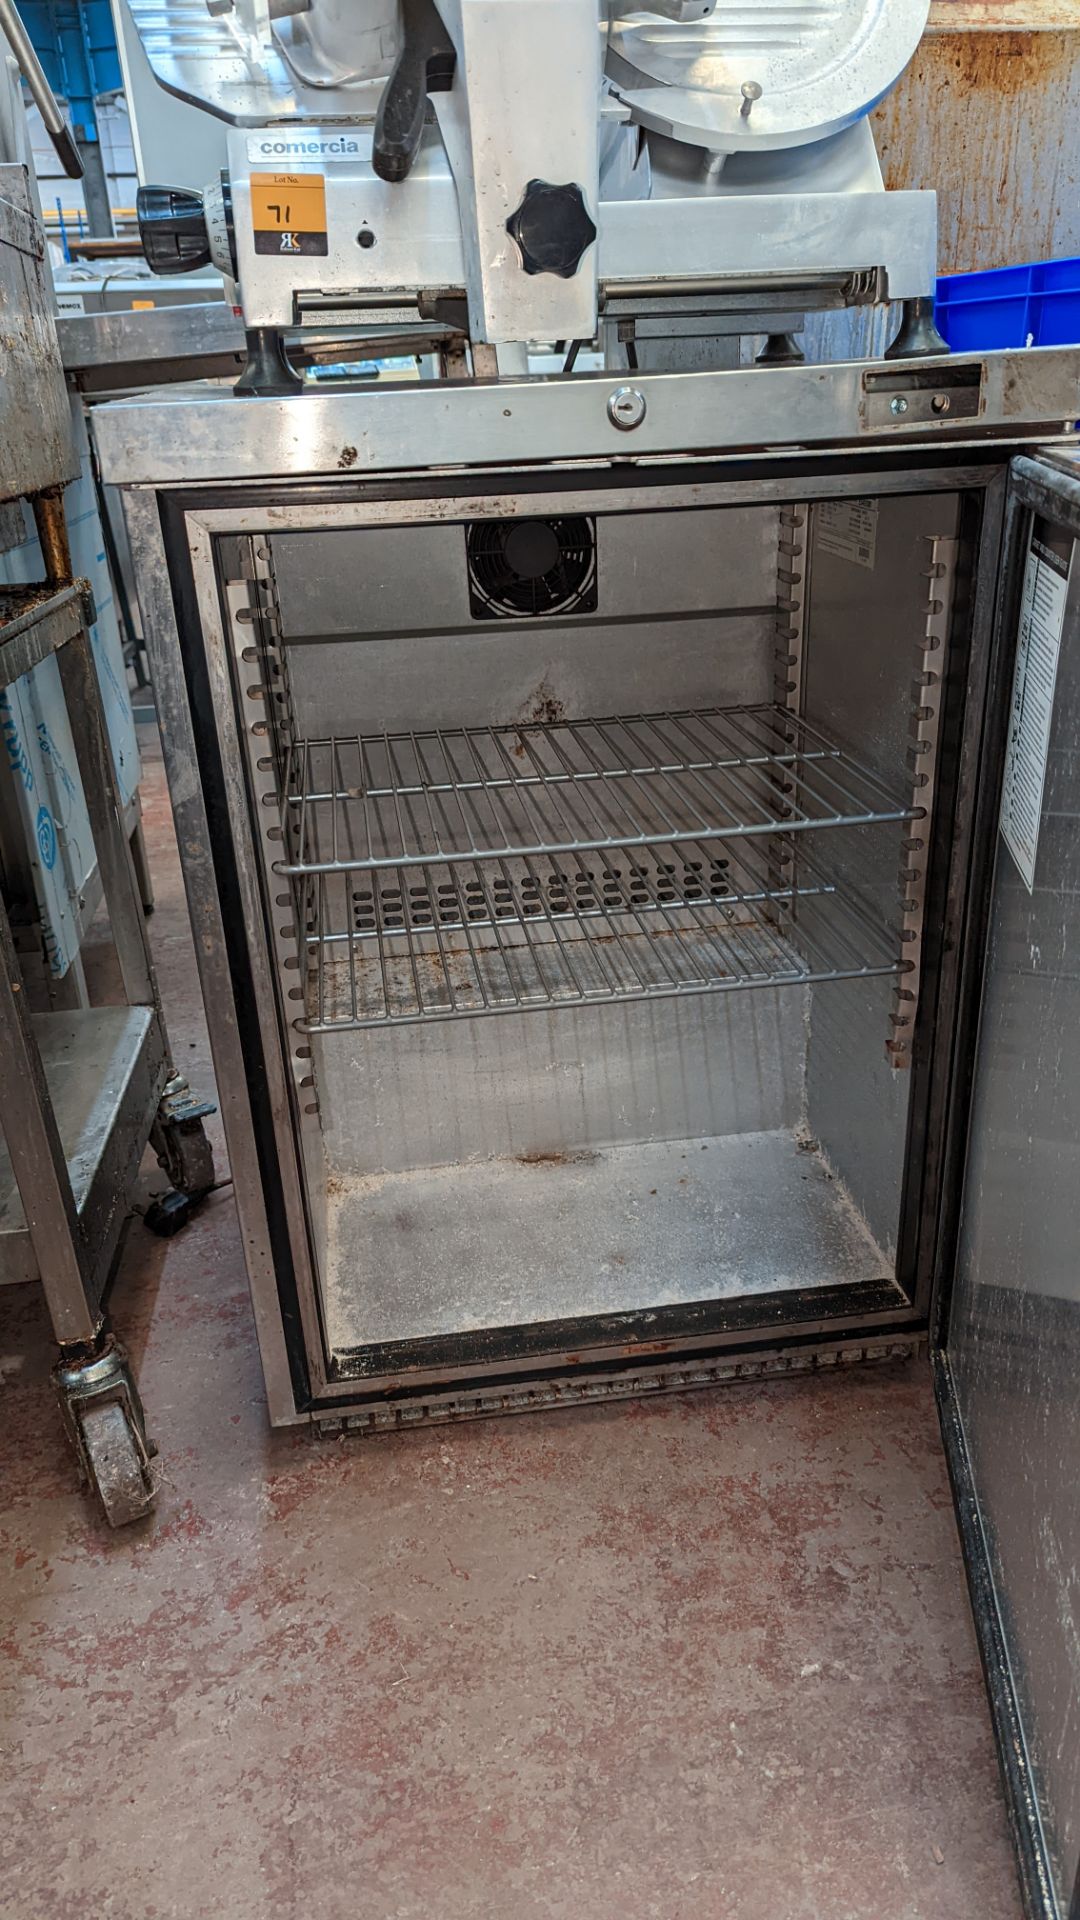 Foster stainless steel under counter fridge model HR150-A - Image 4 of 5